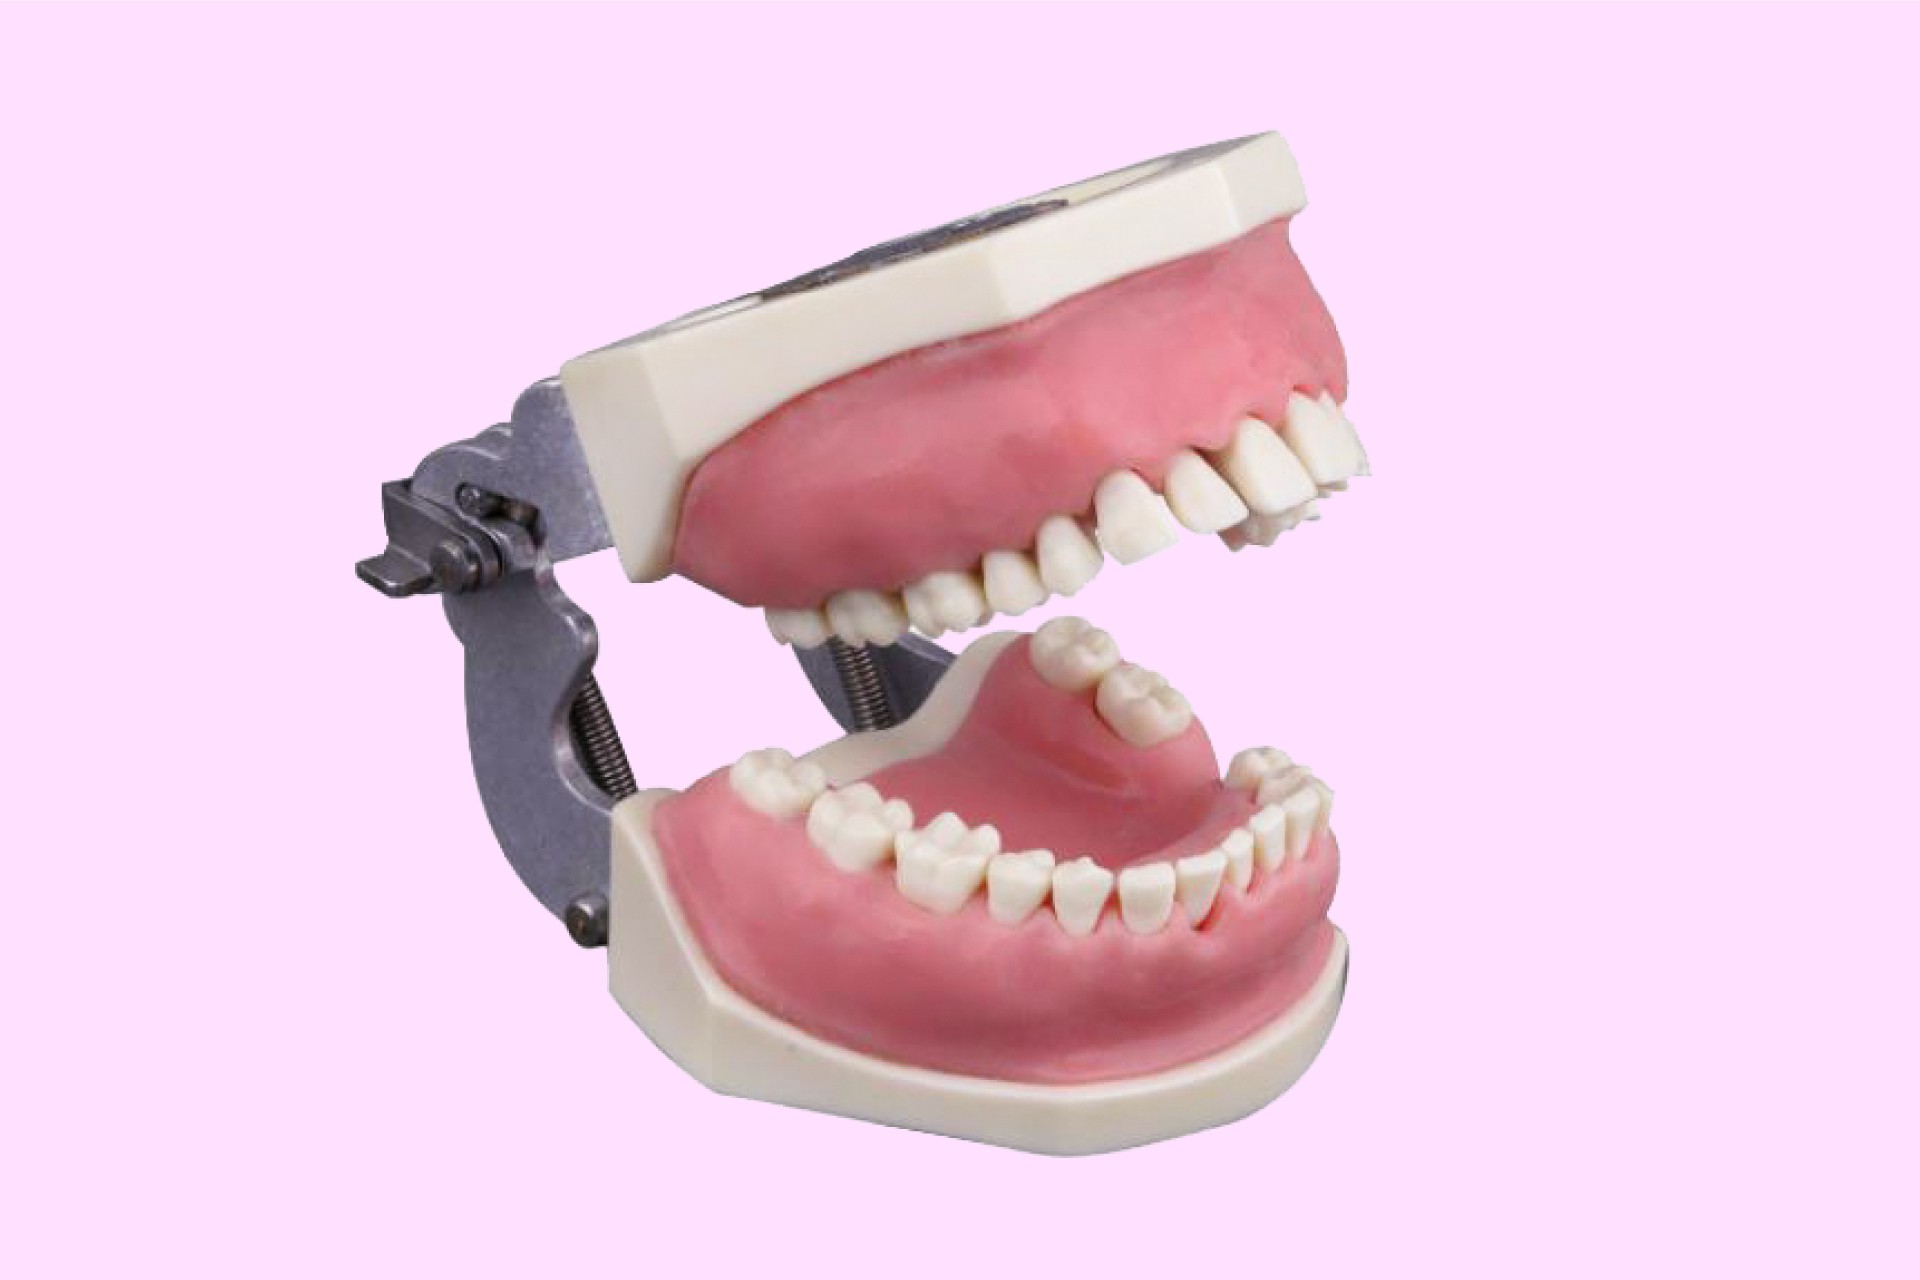 Periodontics Training Arch with Matte Pink Soft Gum with Articulator